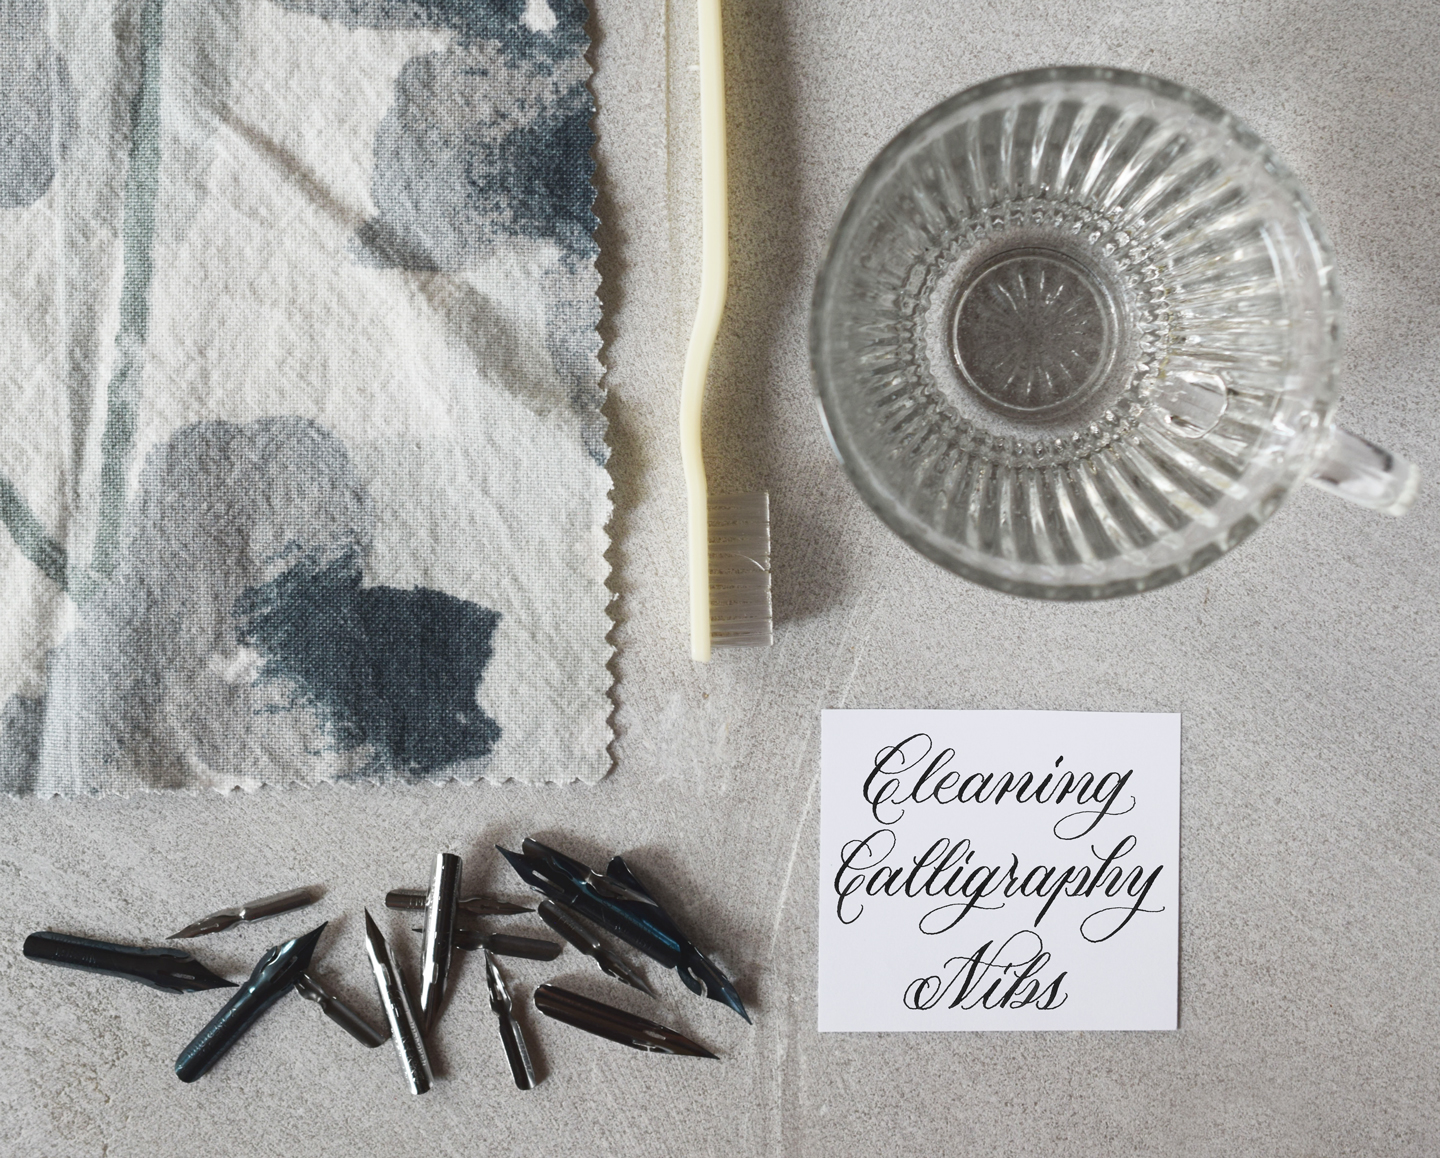 A Guide to Cleaning Calligraphy Nibs